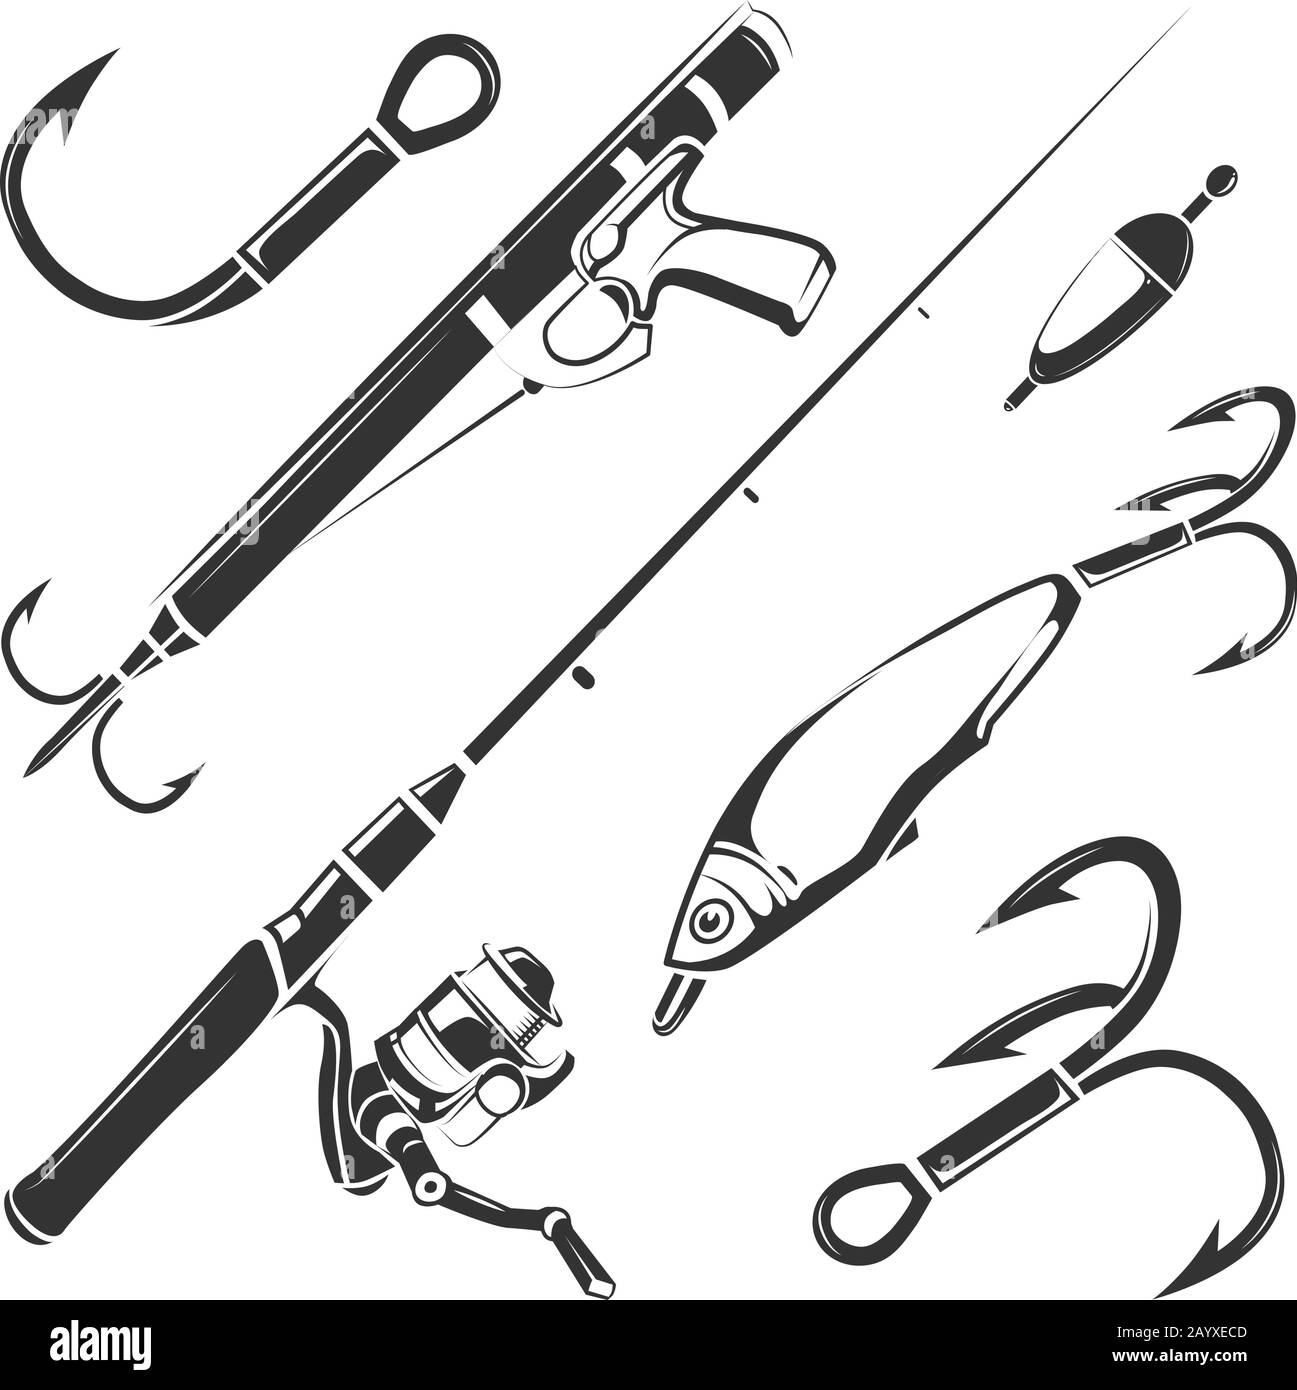 Vintage fishing Cut Out Stock Images & Pictures - Alamy